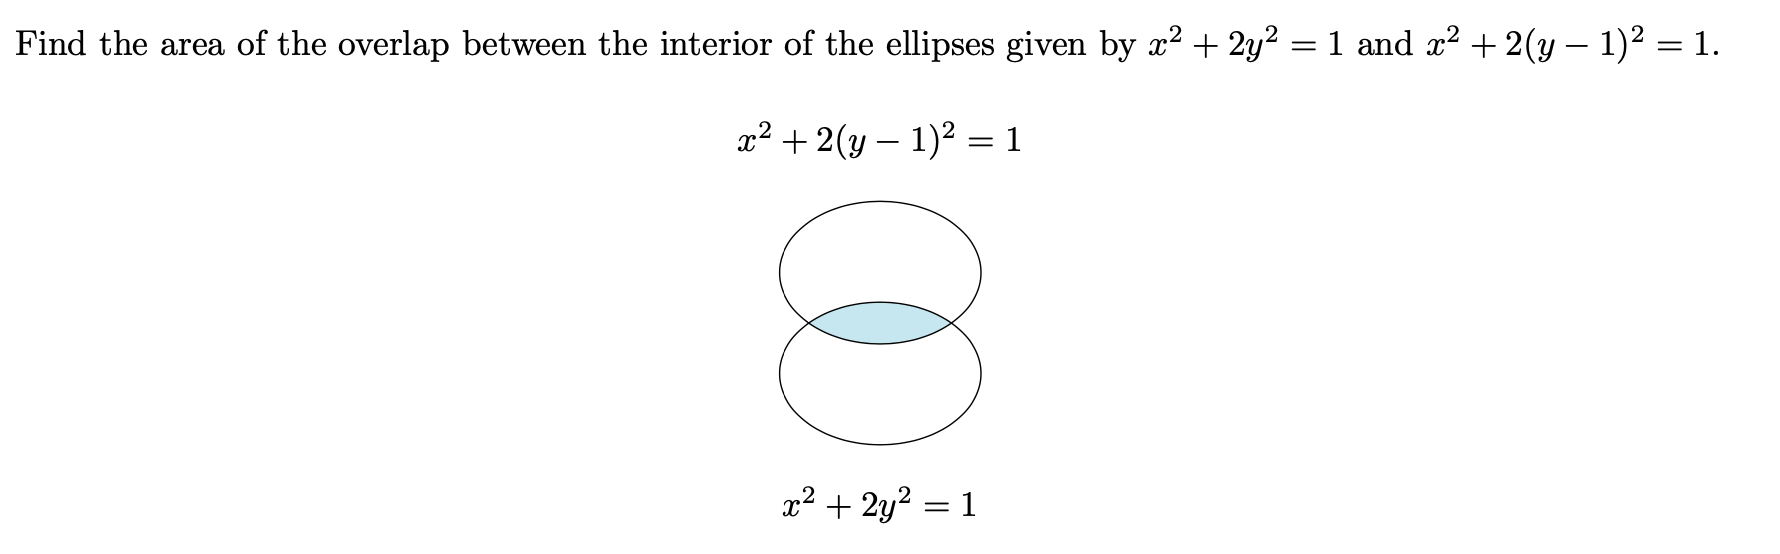 Find the area of the overlap between the interior of the ellipses given by x² + 2y? = 1 and x² + 2(y – 1)² = 1.
x² + 2(y – 1)2 =1
x² + 2y? = 1
